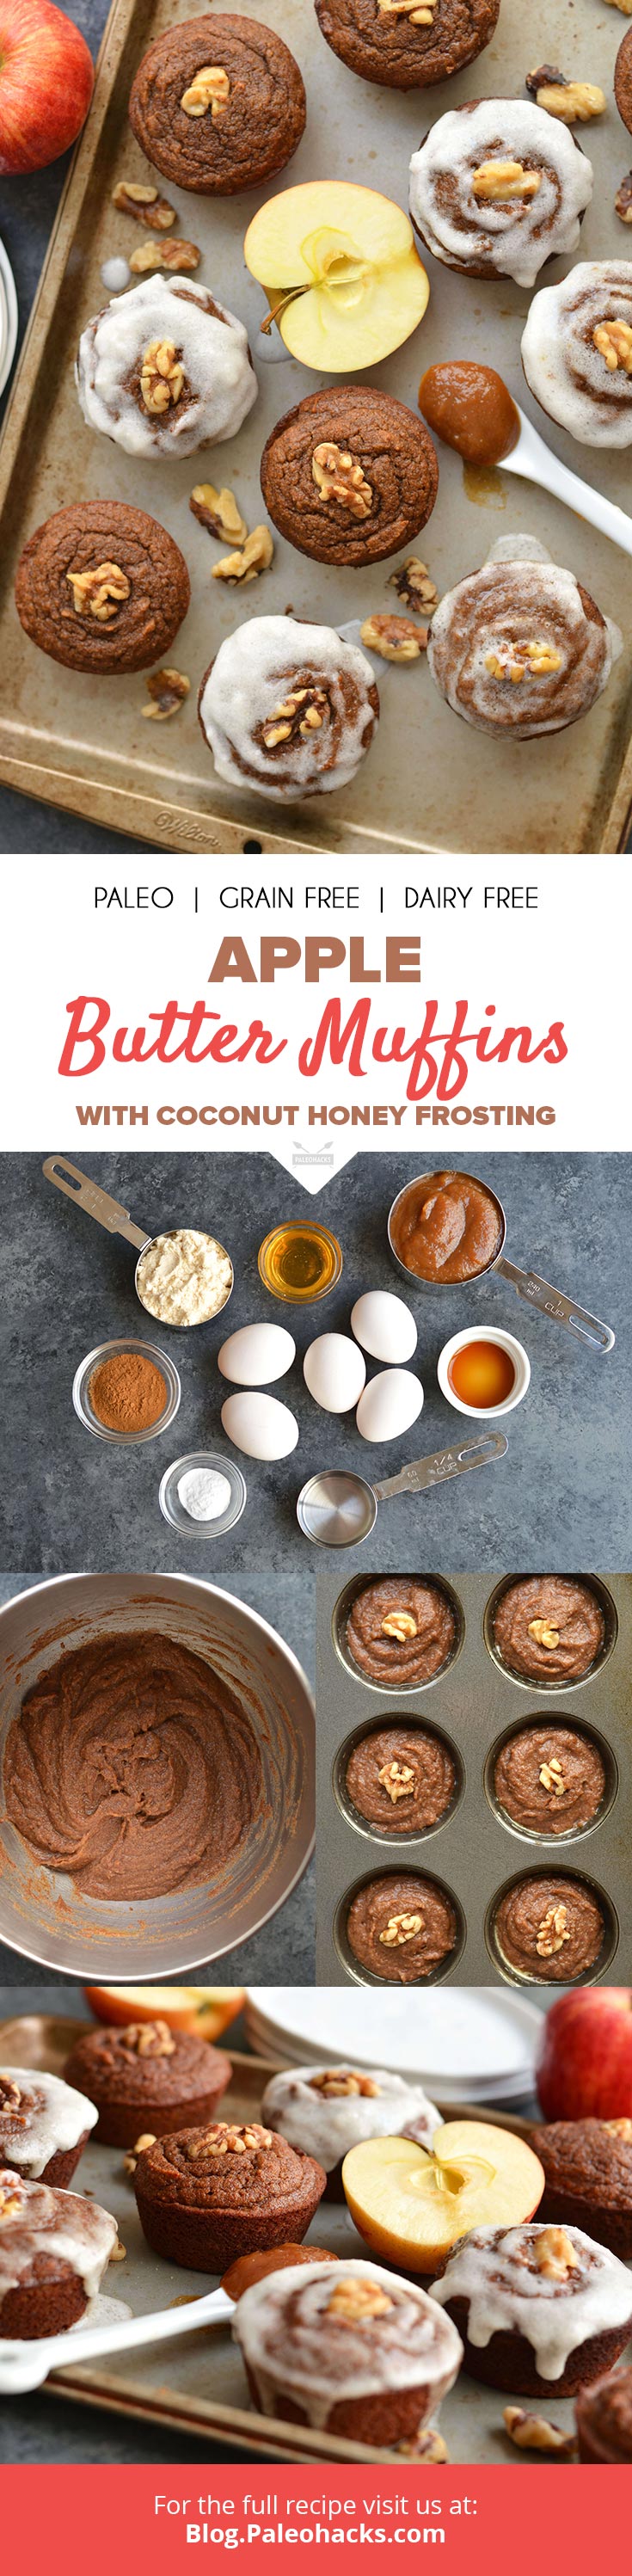 These bakery-style Apple Butter Muffins are drizzled with a coconut frosting for a breakfast best served warm! These muffins taste like cinnamon rolls.